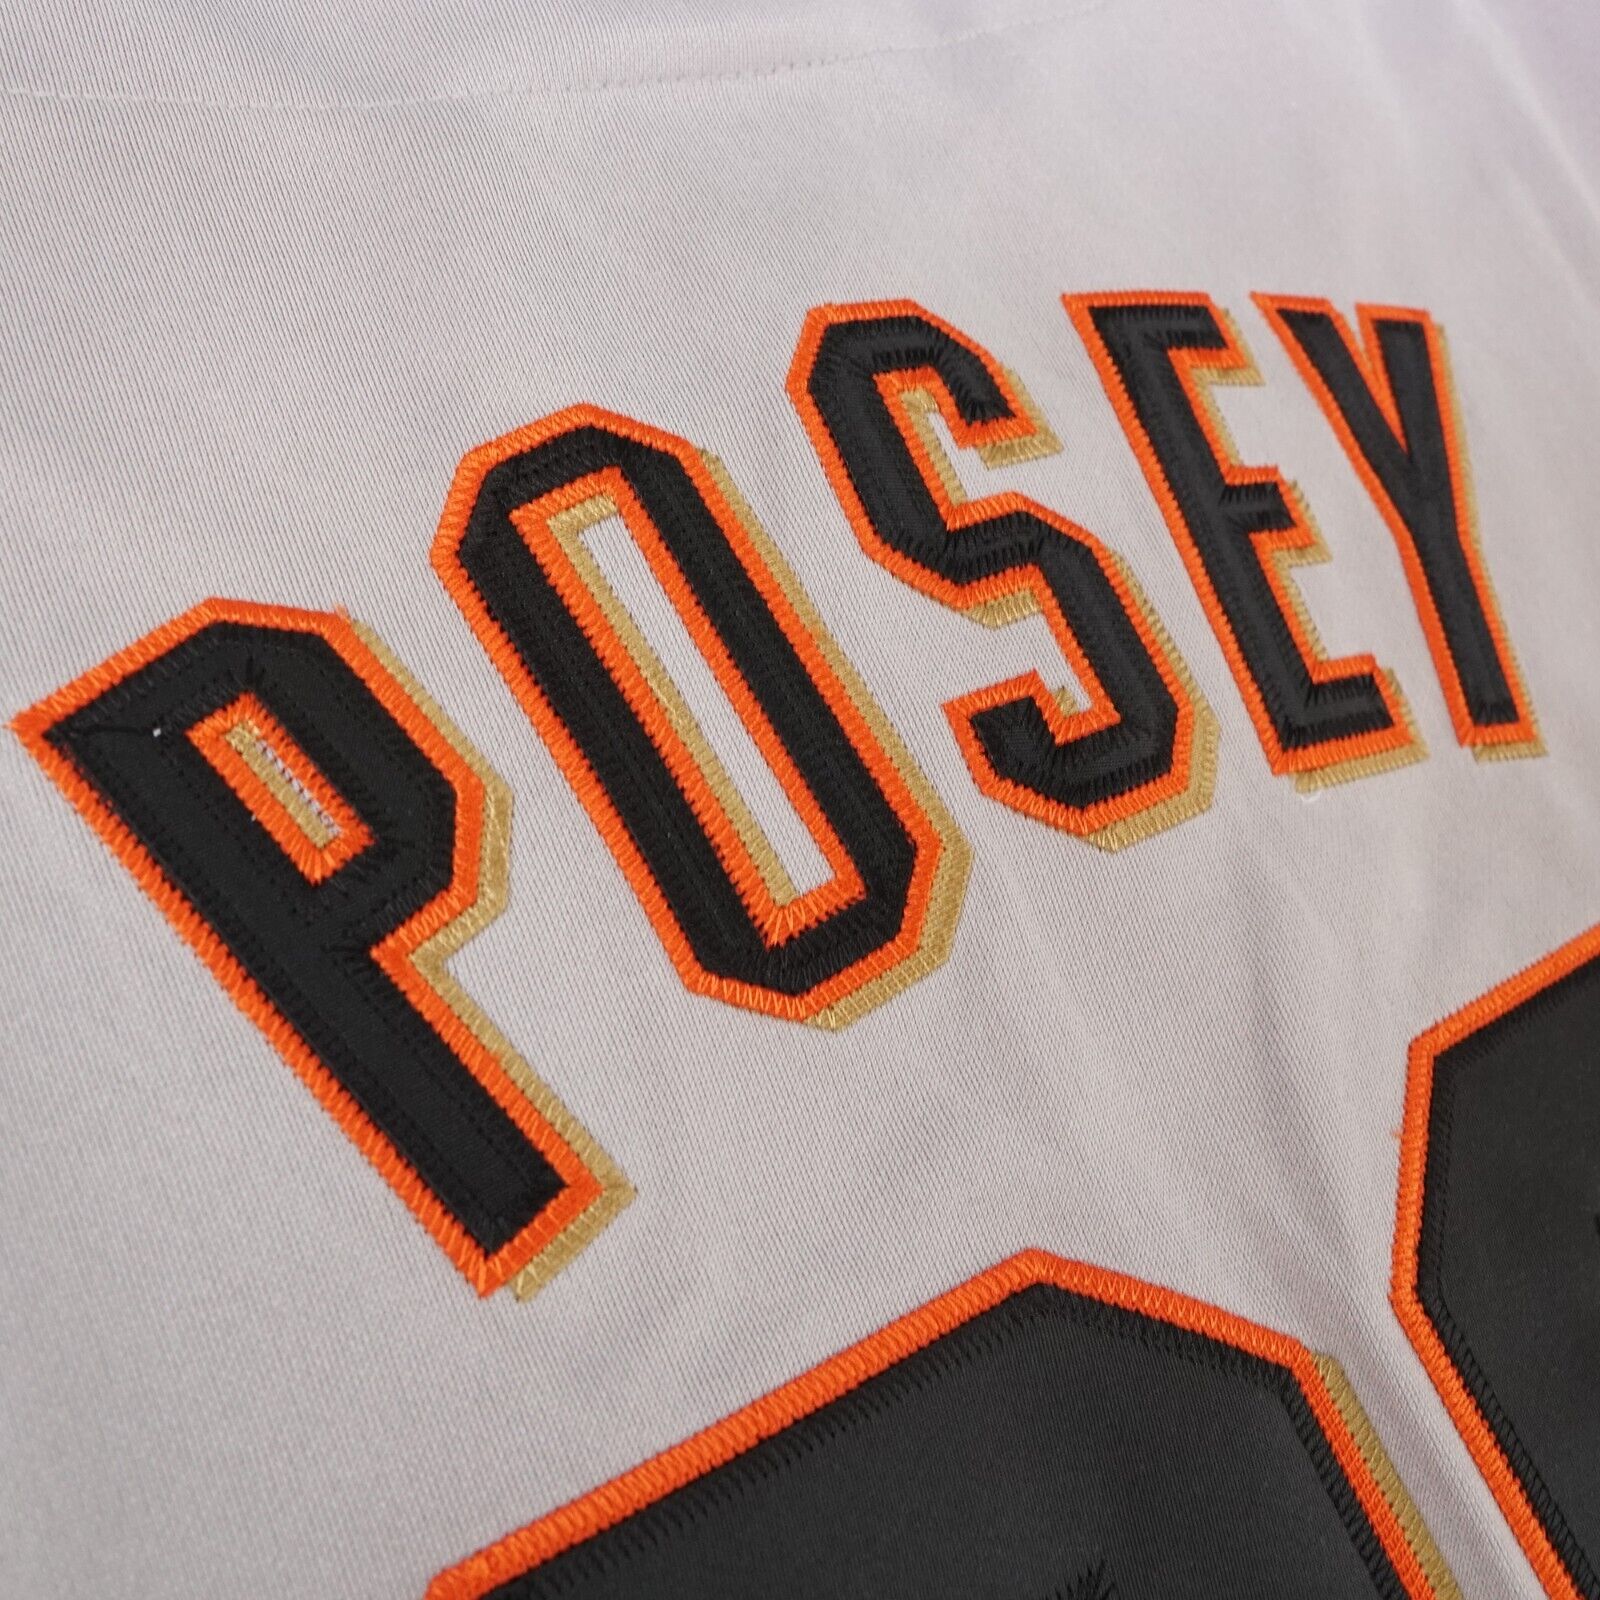 Buster Posey former professional baseball catcher San Francisco Rough T- Shirt, hoodie, sweater, long sleeve and tank top